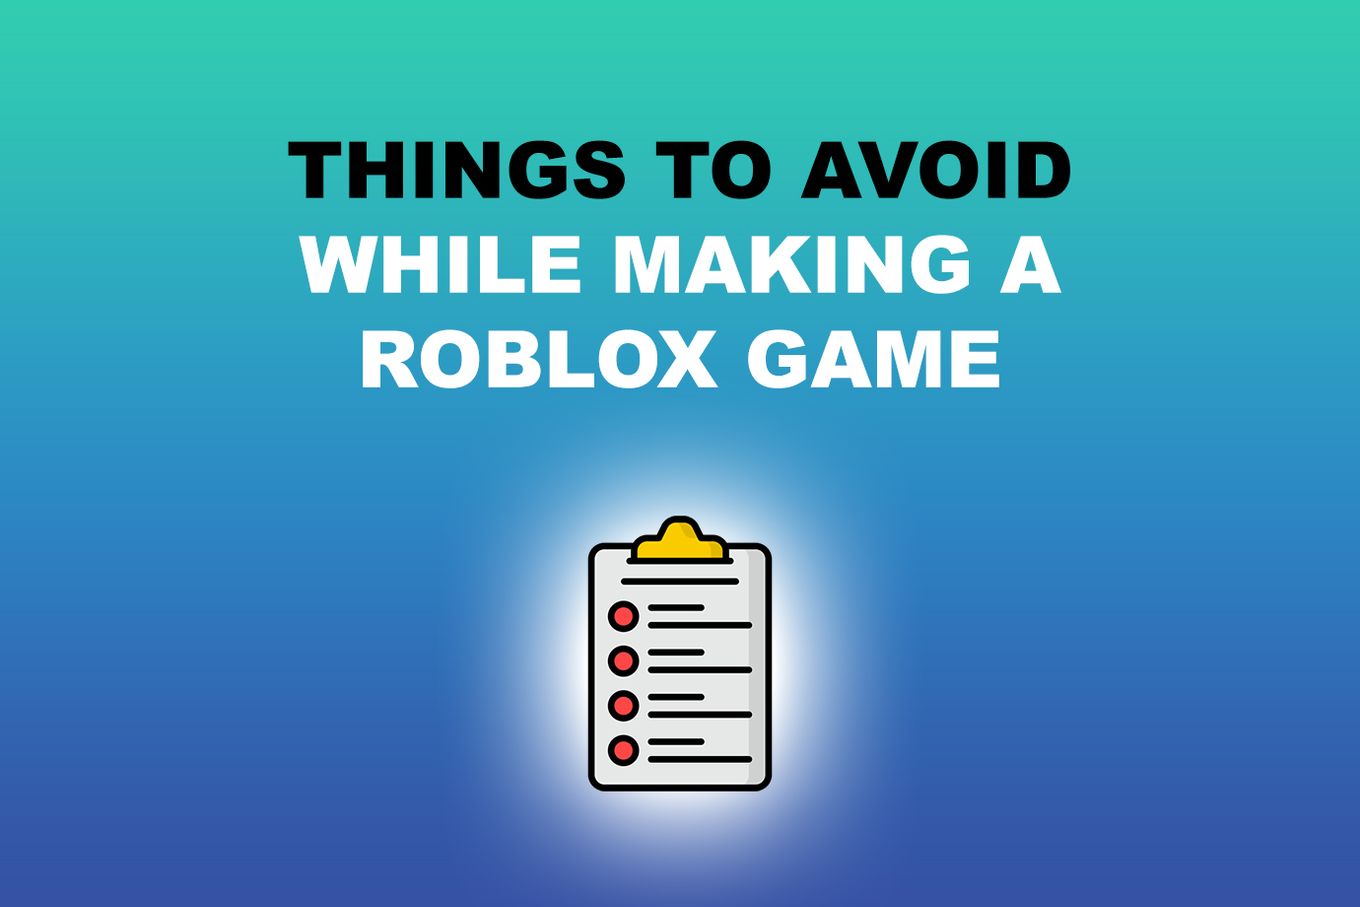 Things to avoid while making a roblox game